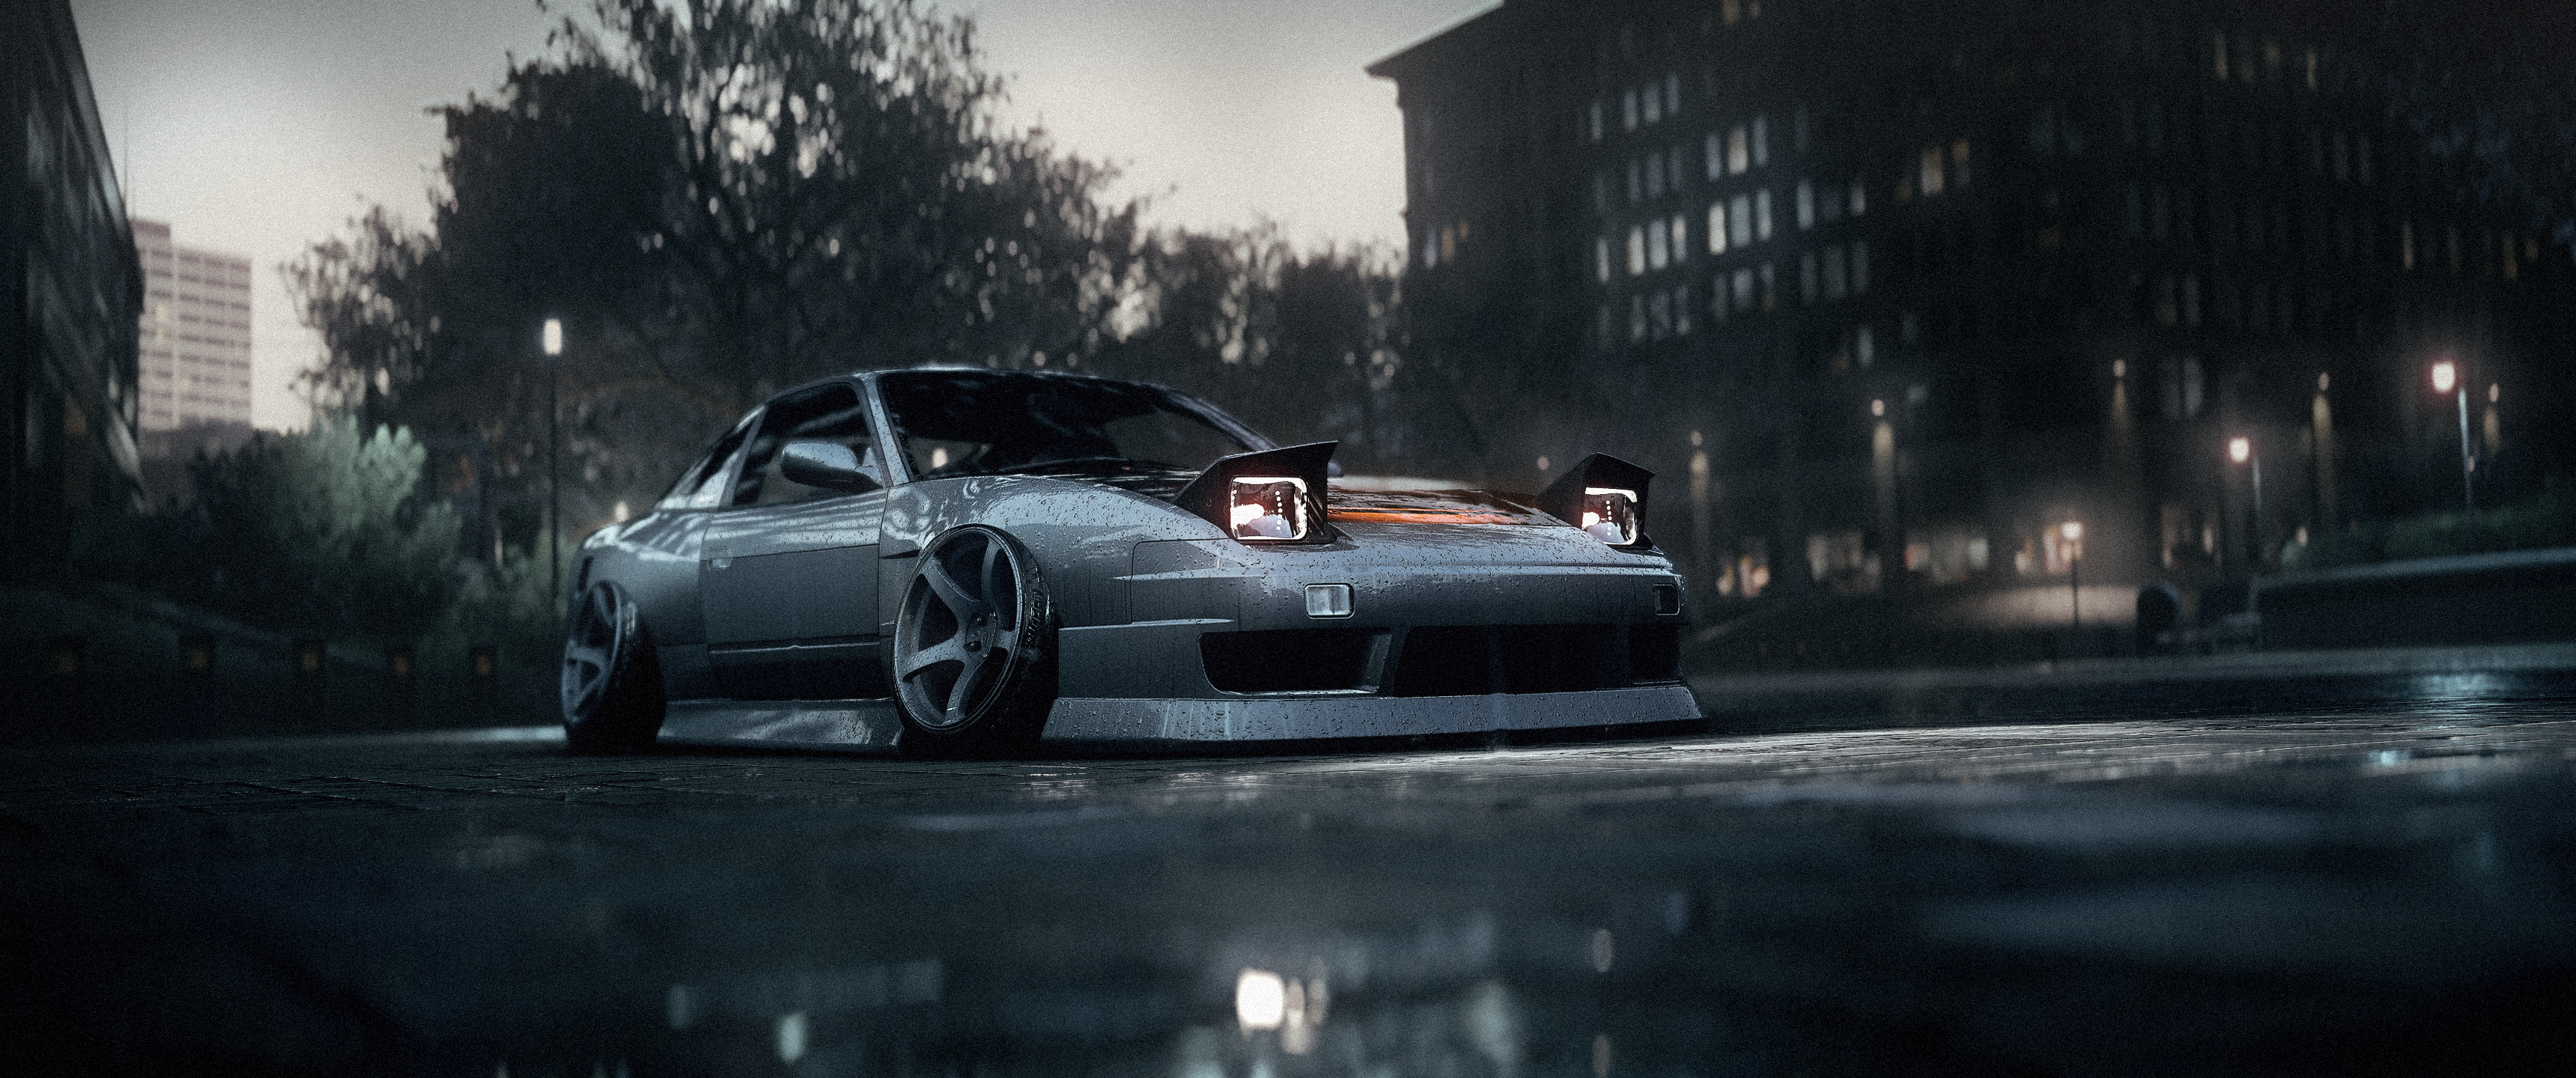 CROWNED Video Games Video Game Art Screen Shot Car Vehicle Stanced Nissan Nissan 240SX Need For Spee 3440x1440